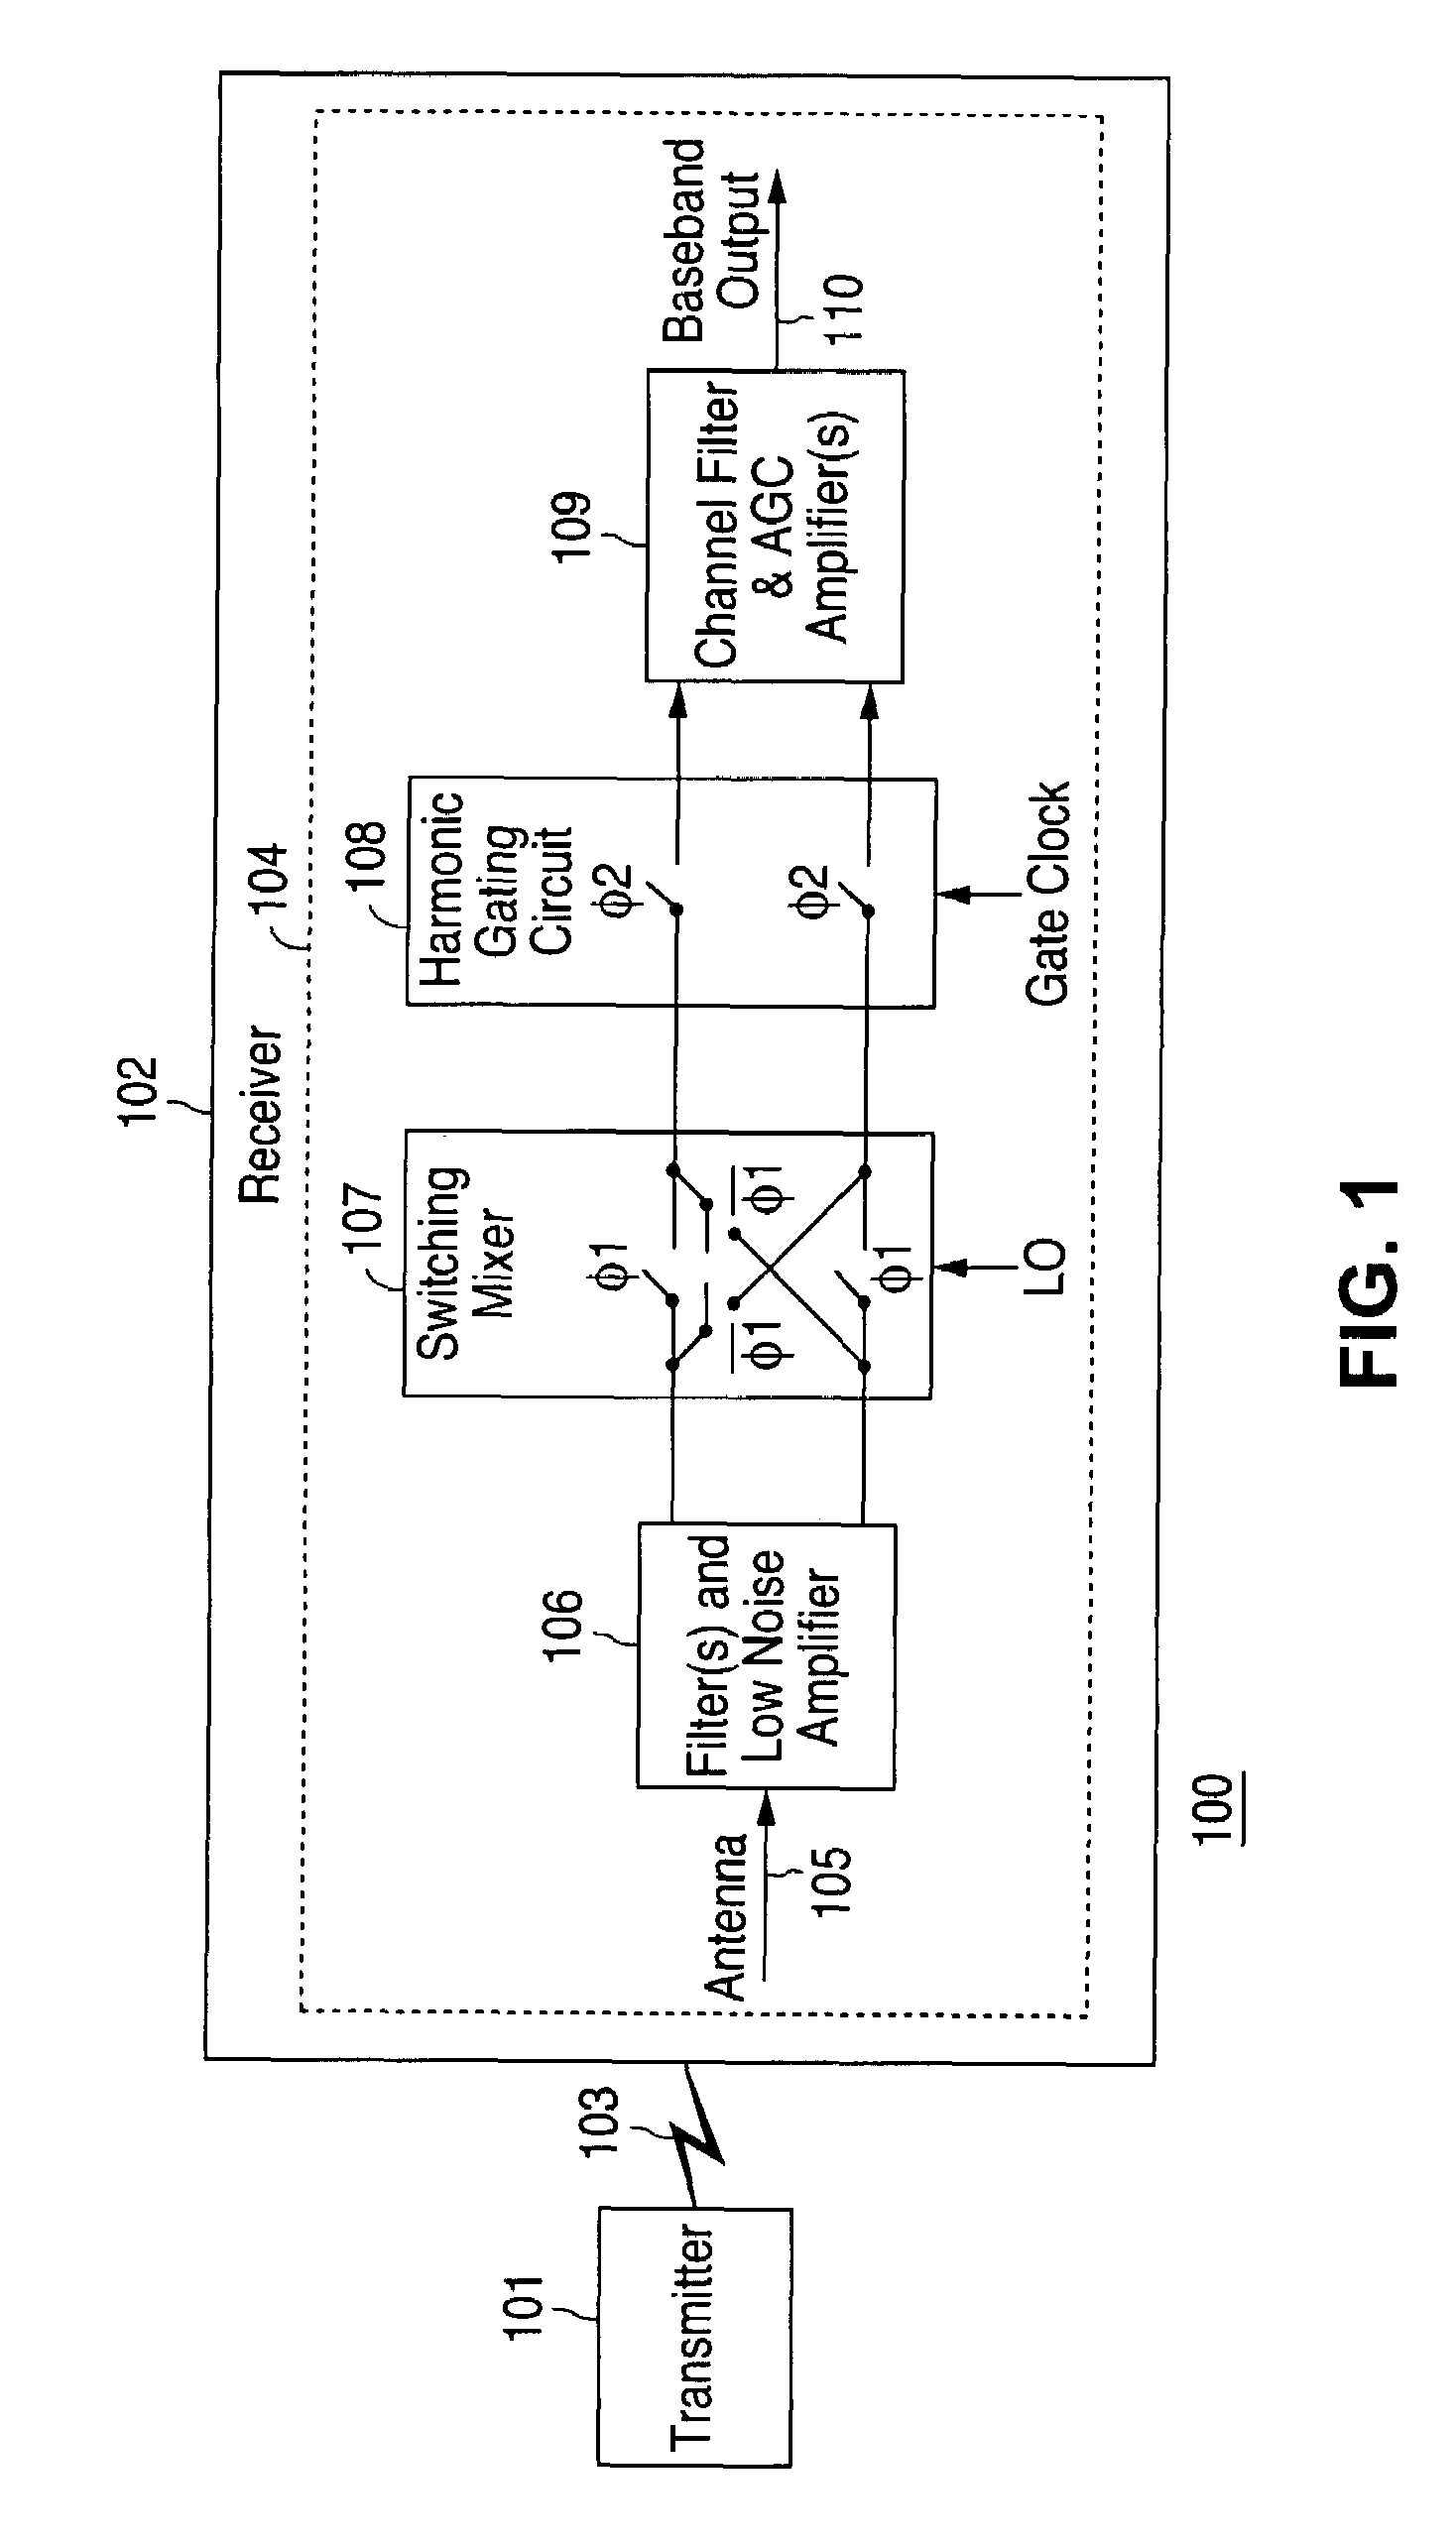 Harmonic rejection gated-switching mixer